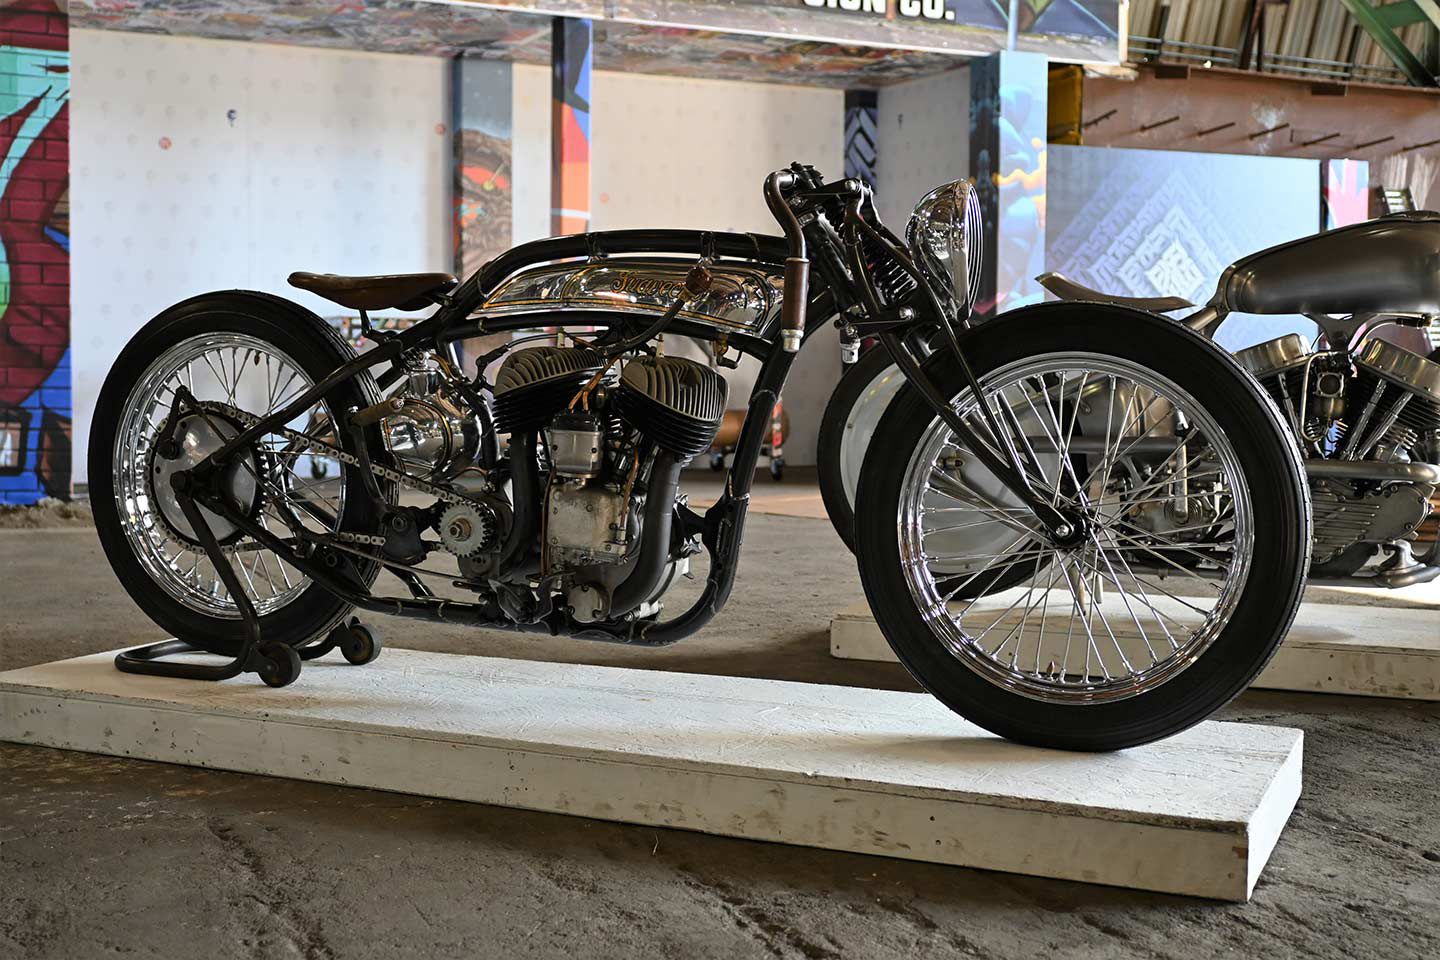 Among the returning favorites was Cristian Sosa’s 750cc “Suavecito,” a steampunk mashup of boardtrack style with custom fabbed bodywork and frame based on a 1940 Indian Scout.